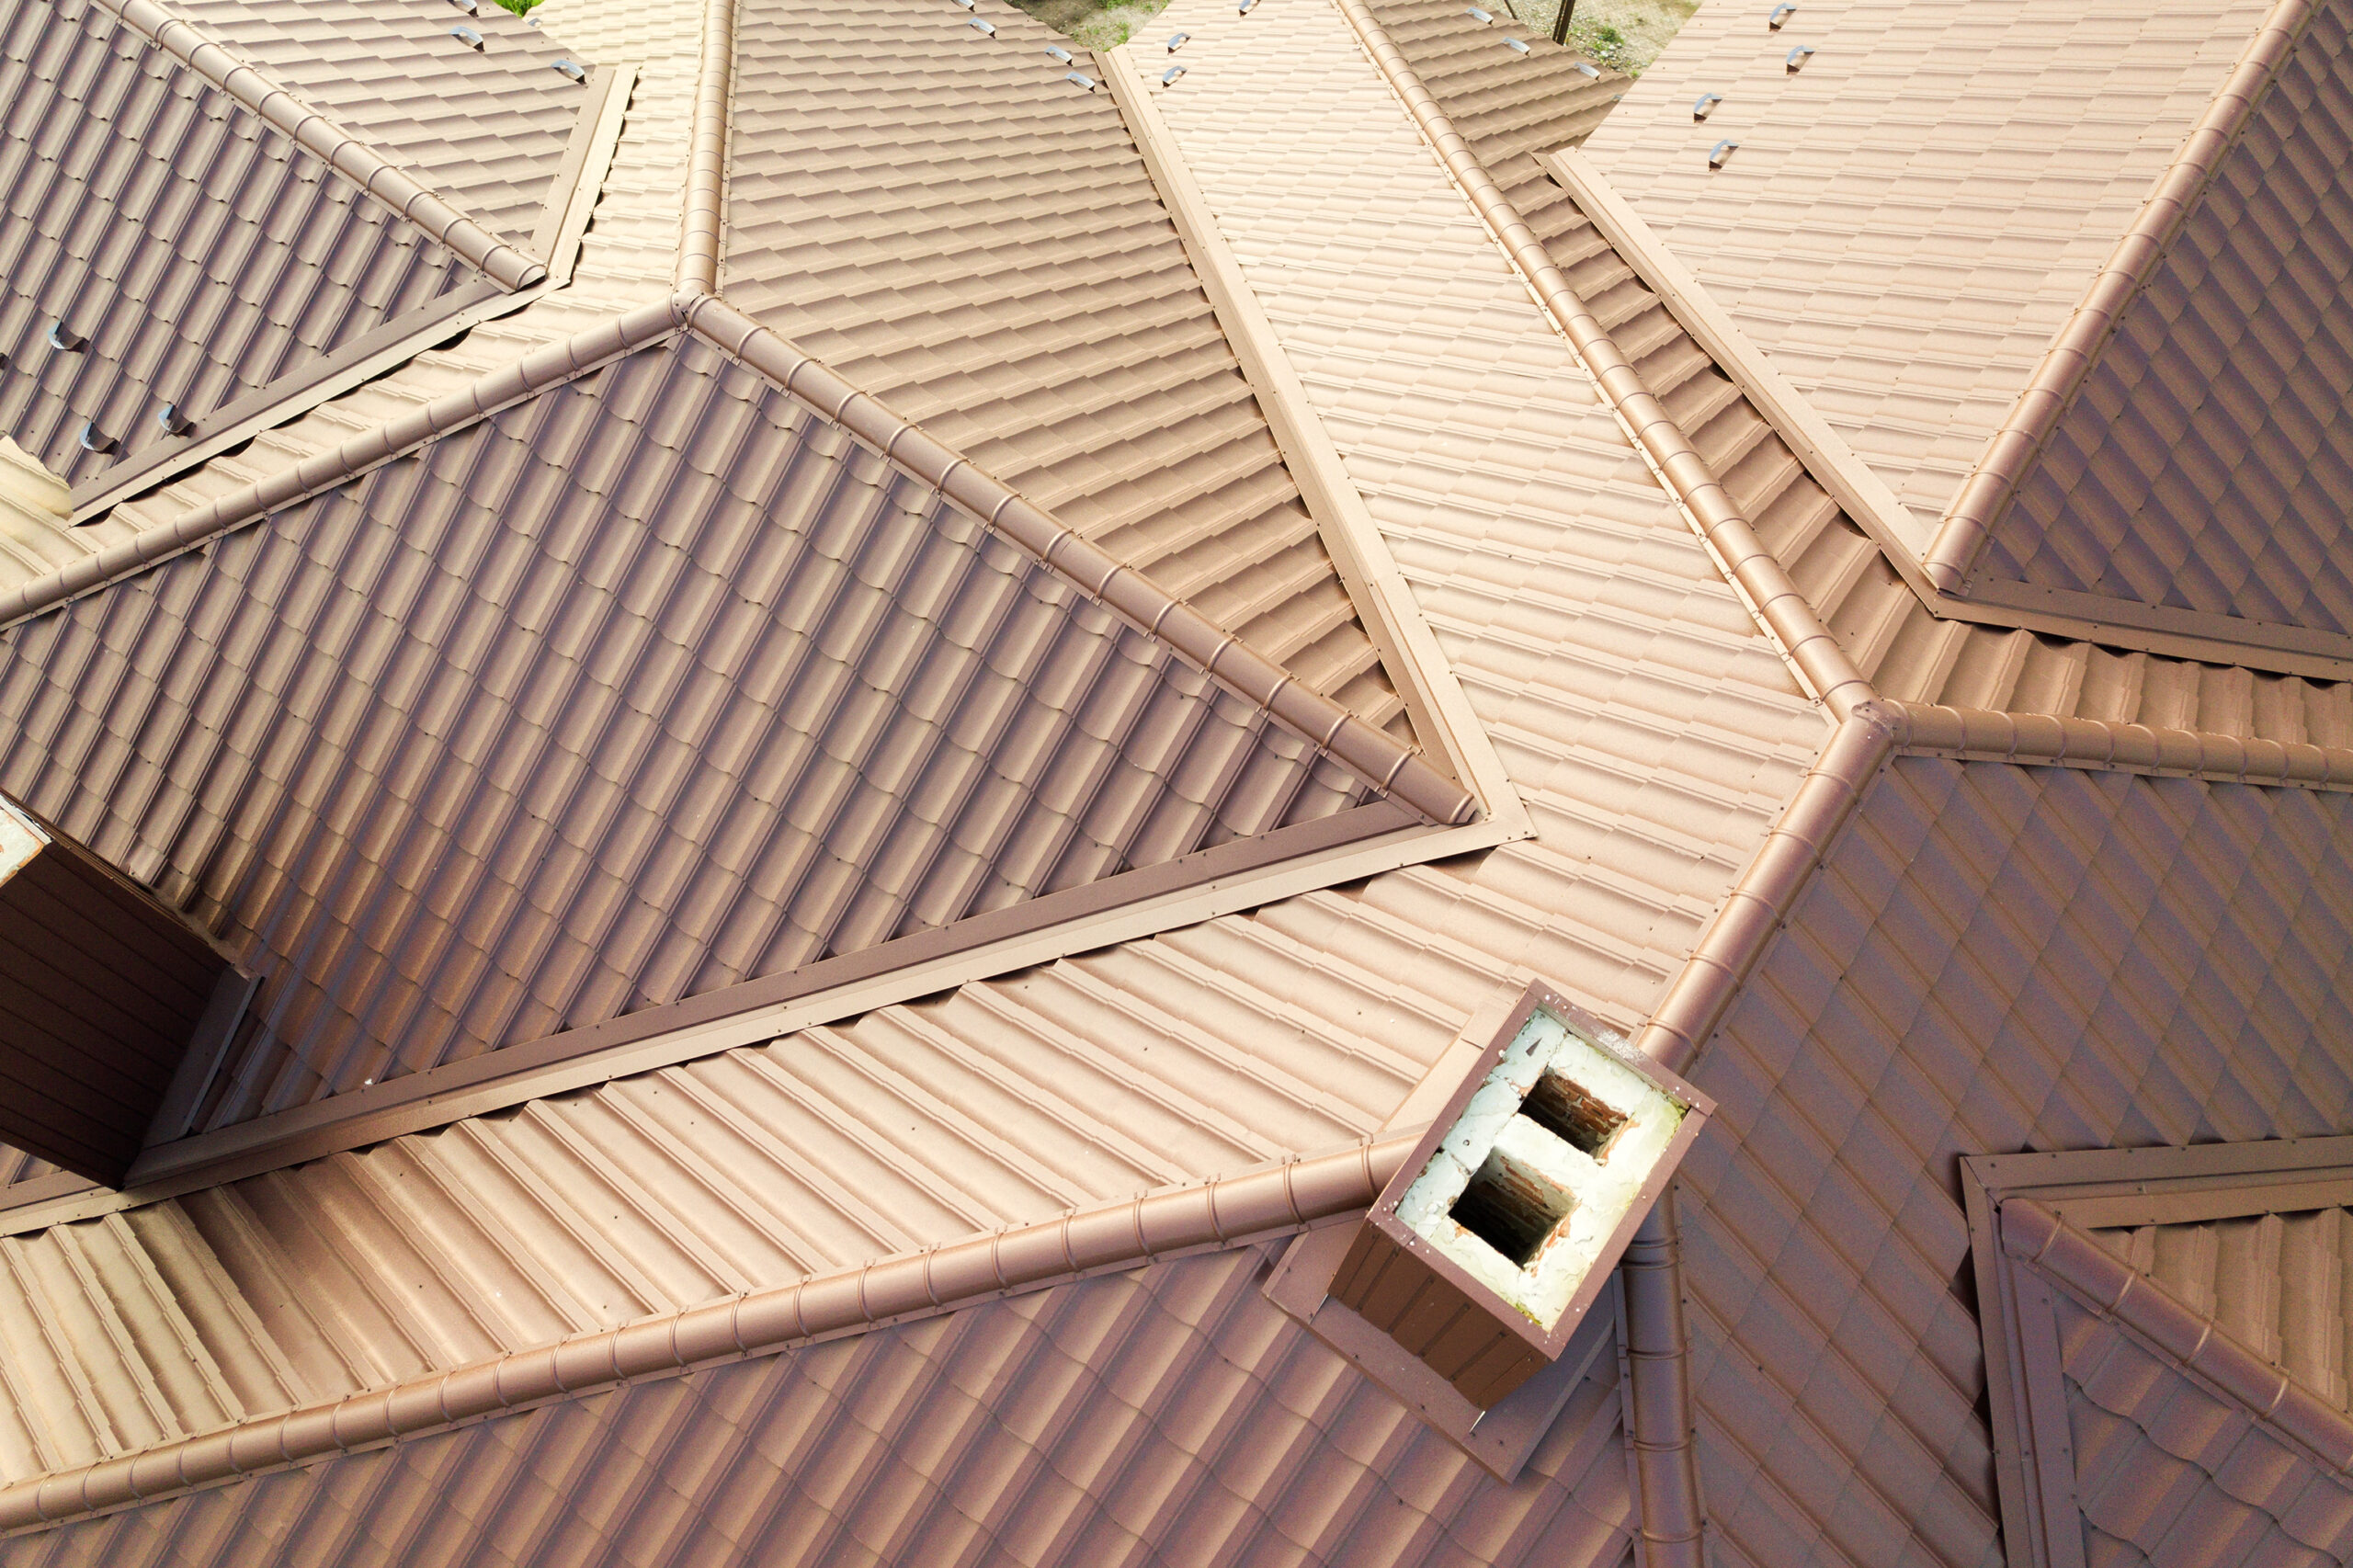 Aerial view of a complex roof structure with multiple ridges and slopes, featuring brown terracotta metal tiles and a single visible chimney.